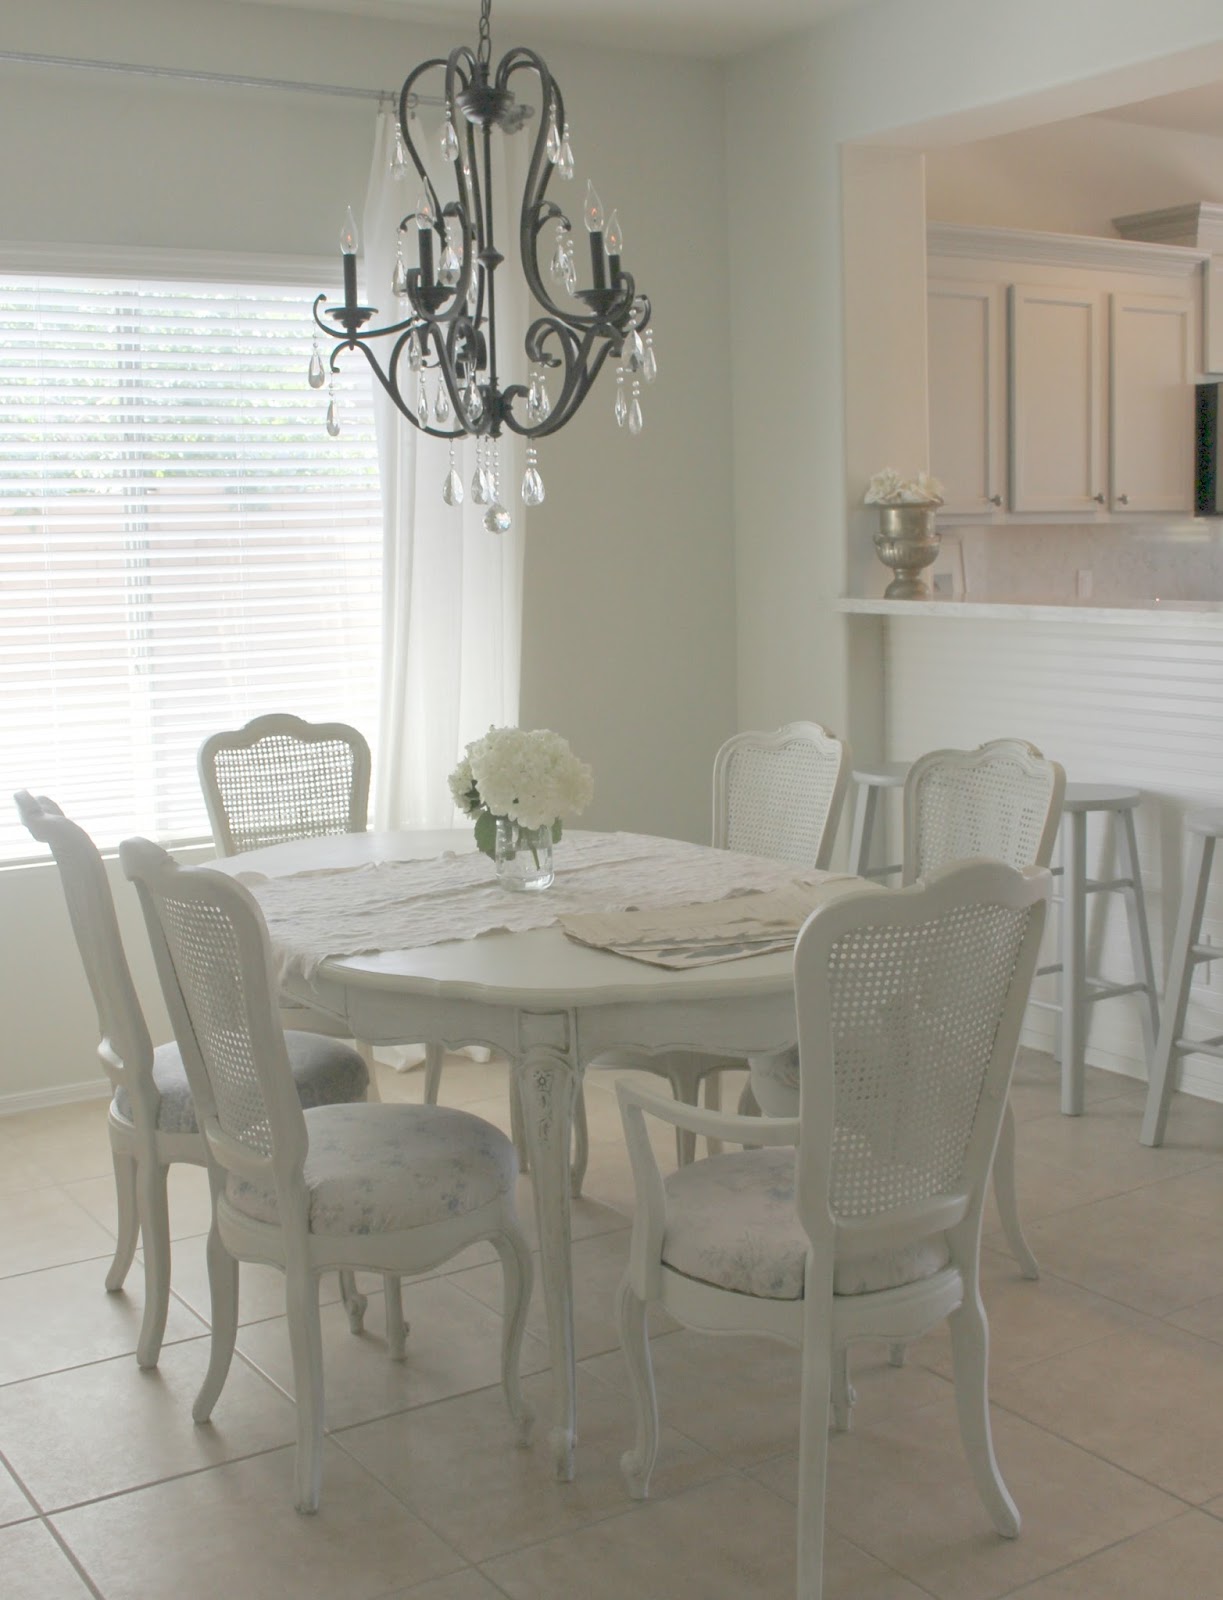 Shabby chic white dining room set with cane back chairs by Hello Lovely Studio